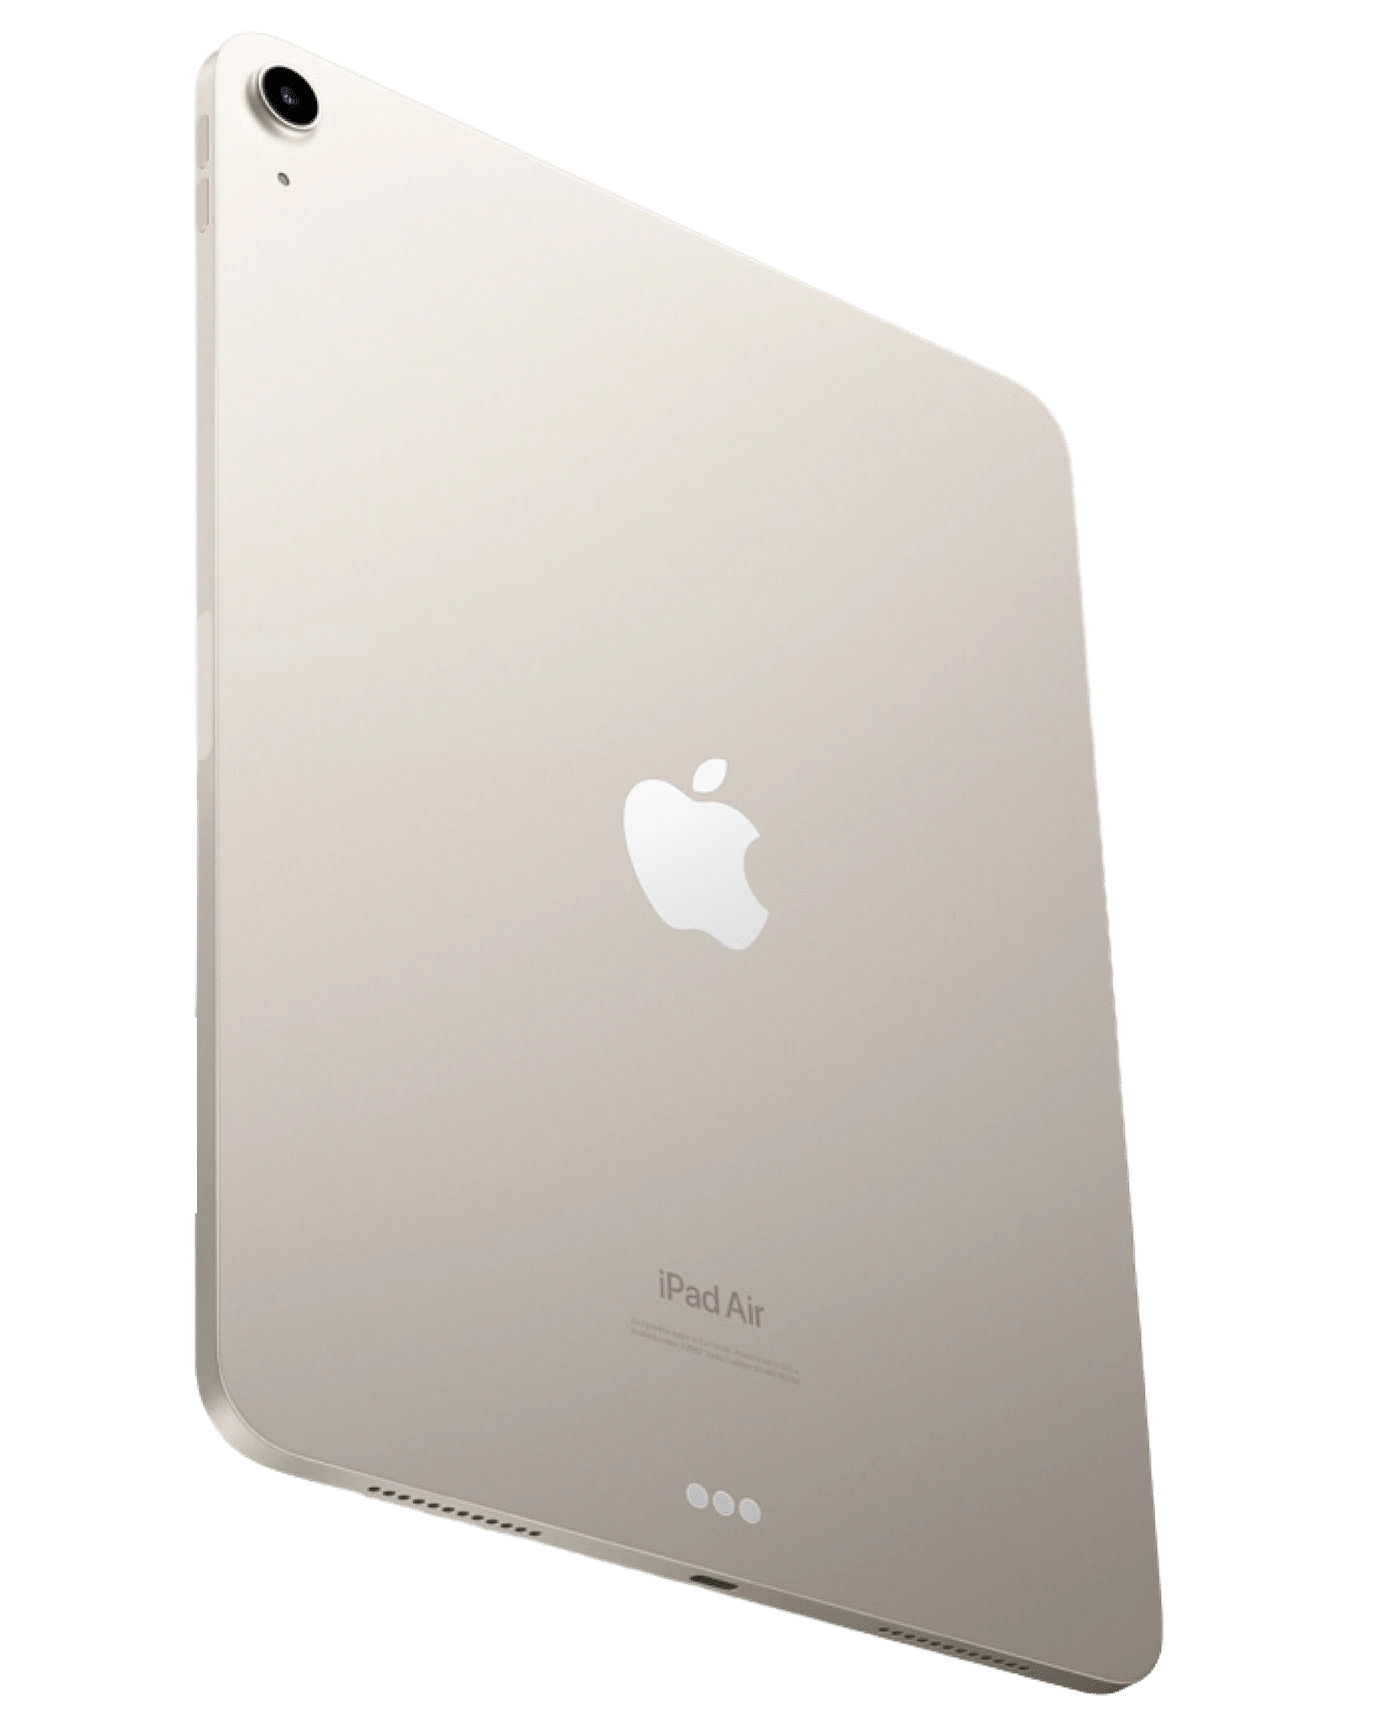 Custom dimensions 698x858 px 1 ipad air from the plus addons for elementor